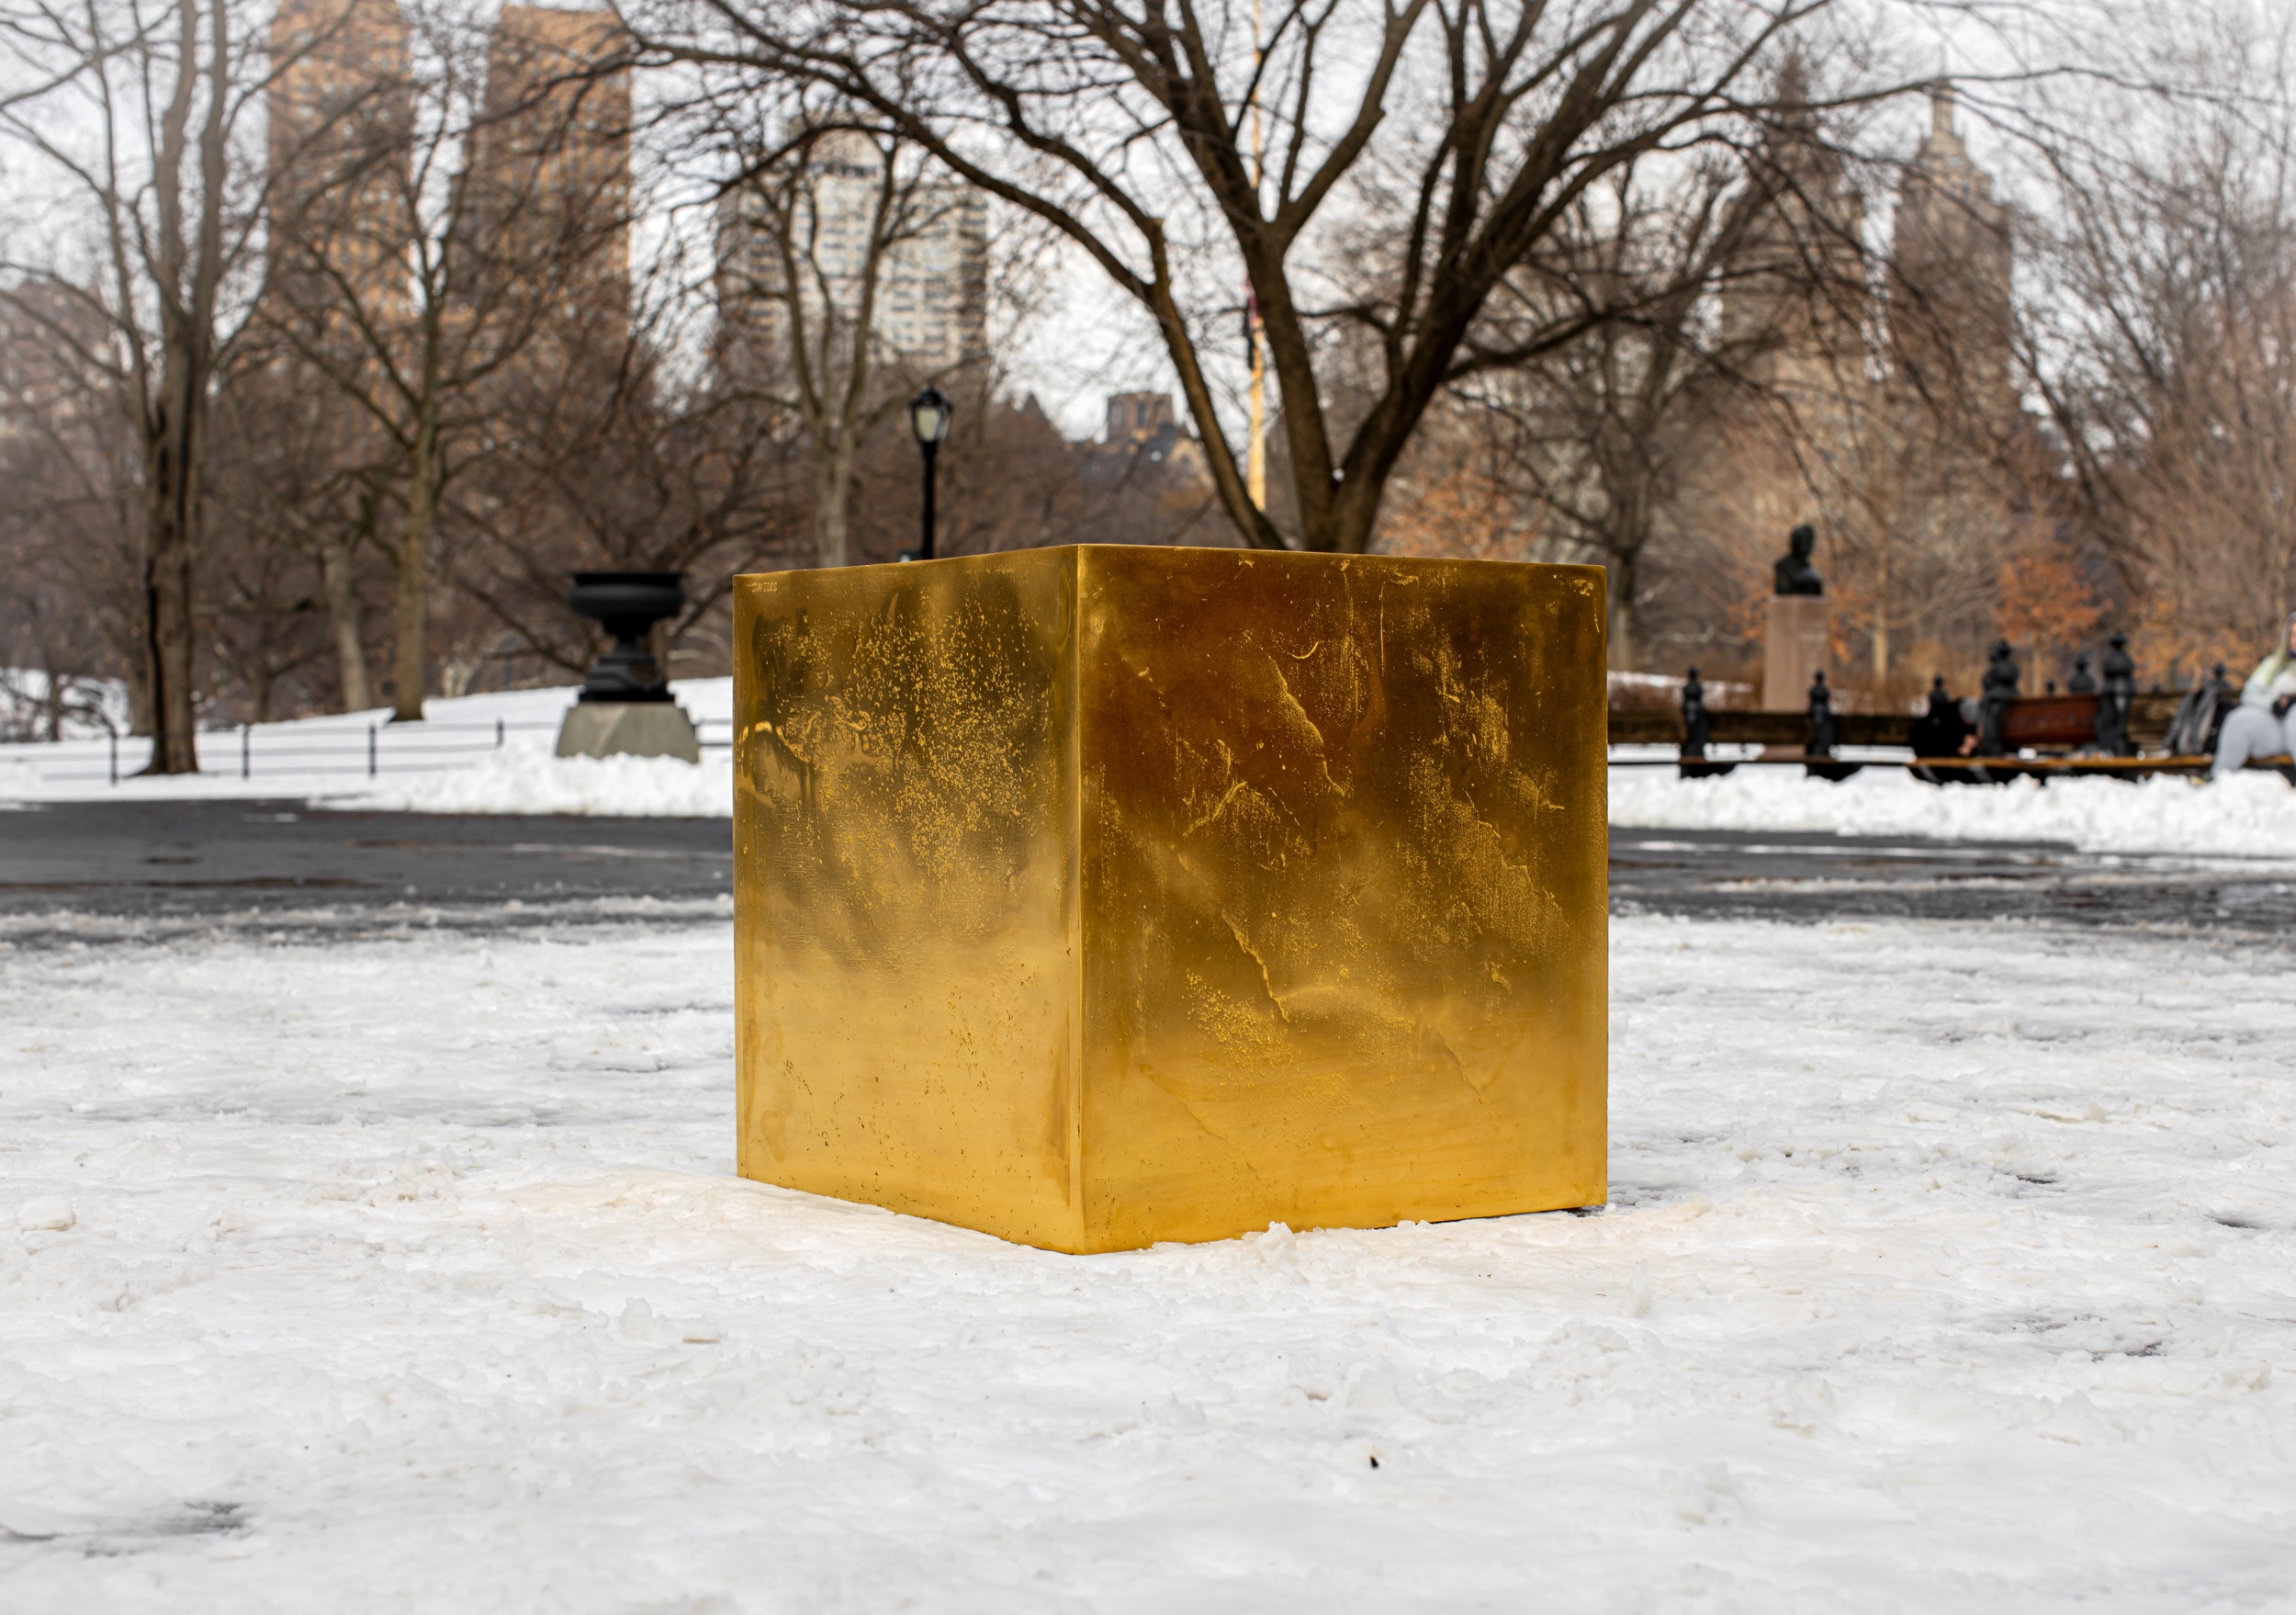 The Castello CUBE attracted worldwide attention when the golden cube by artist Niclas Castello was shown first in New York